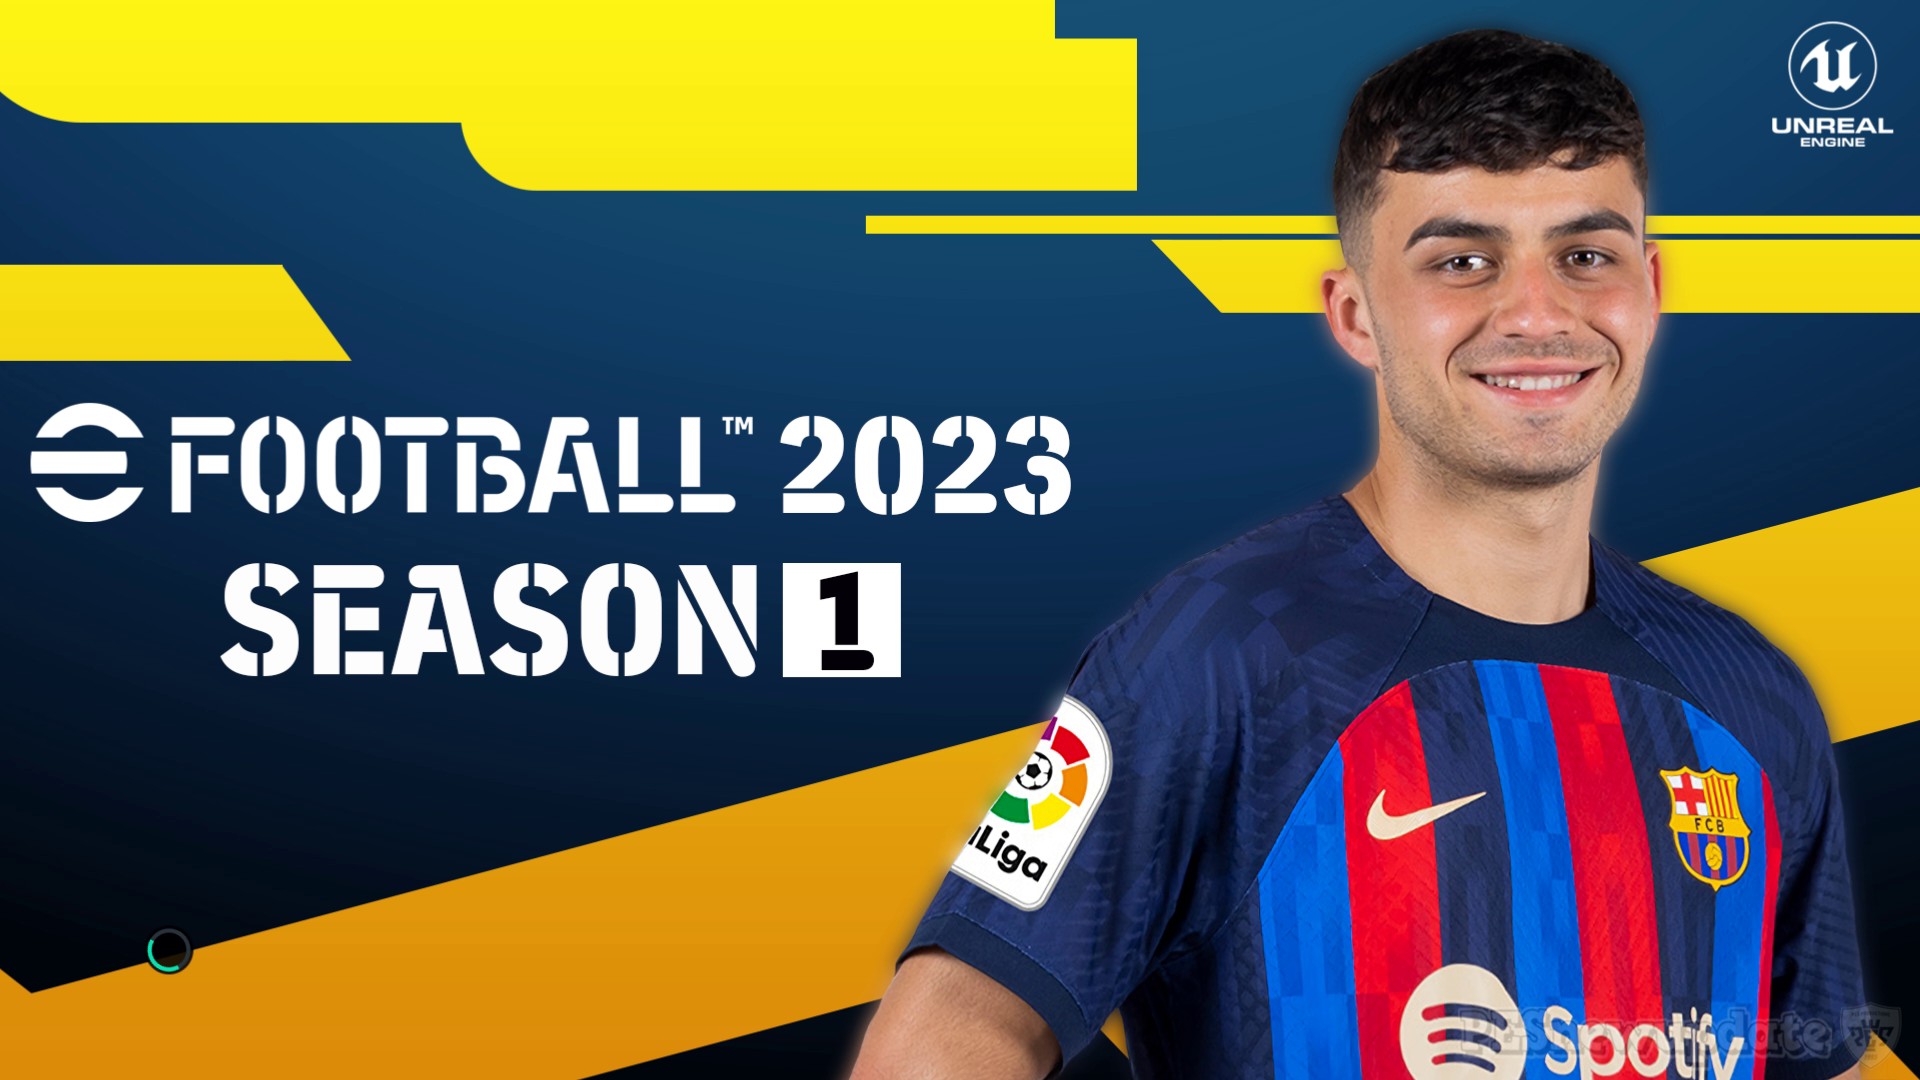 PES 2023  eFootball 2023 PS3 